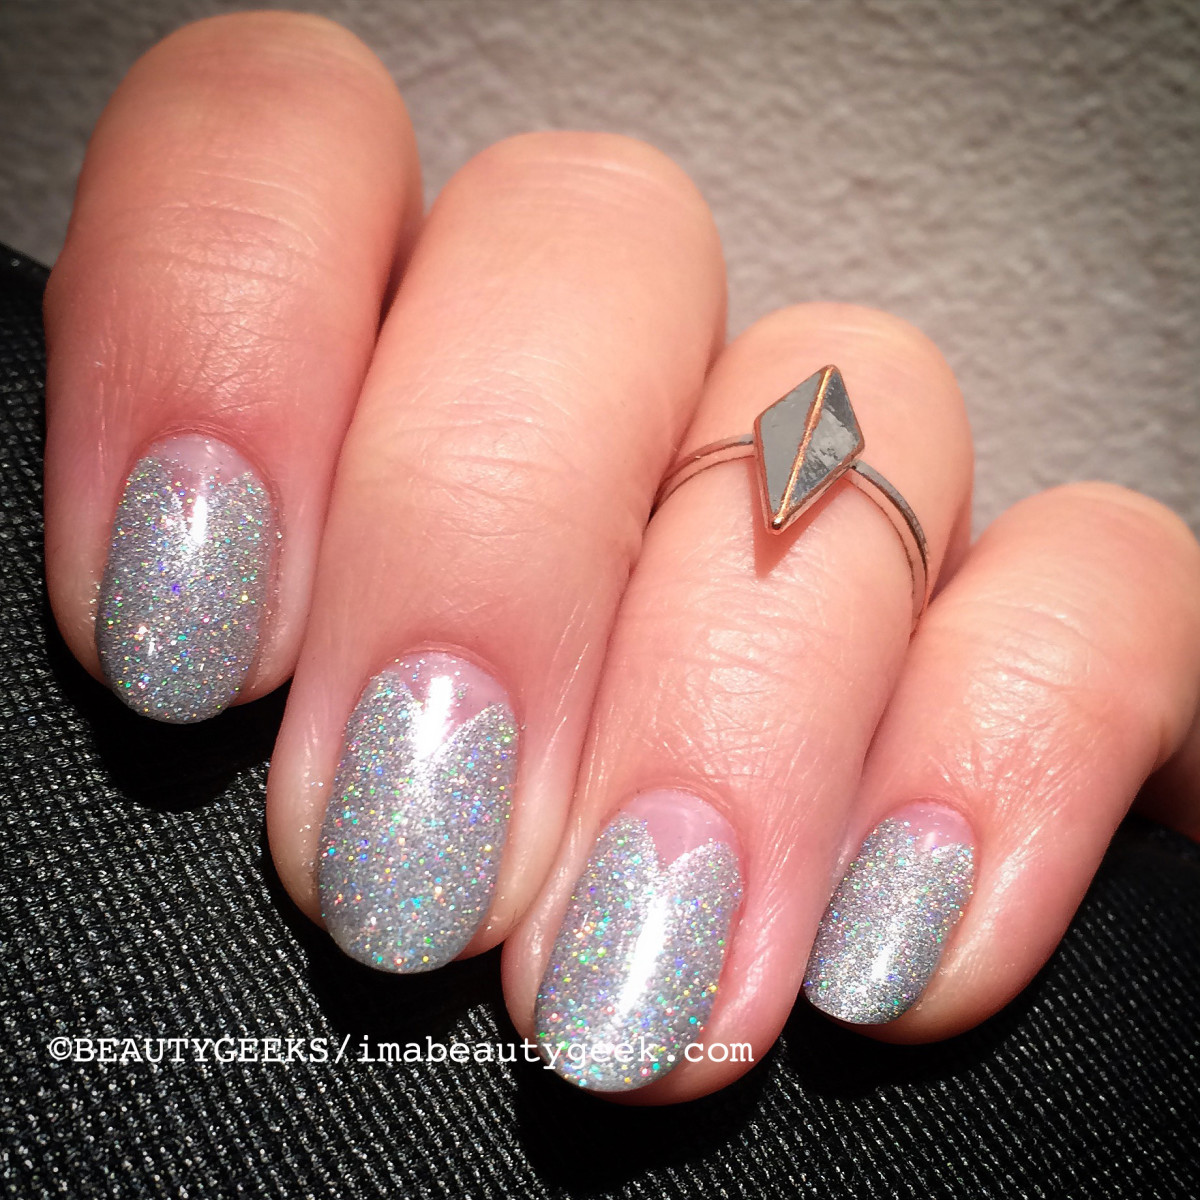 SCALLOPED OR TULIP MANICURE IN HOLOGRAPHIC GLITTER